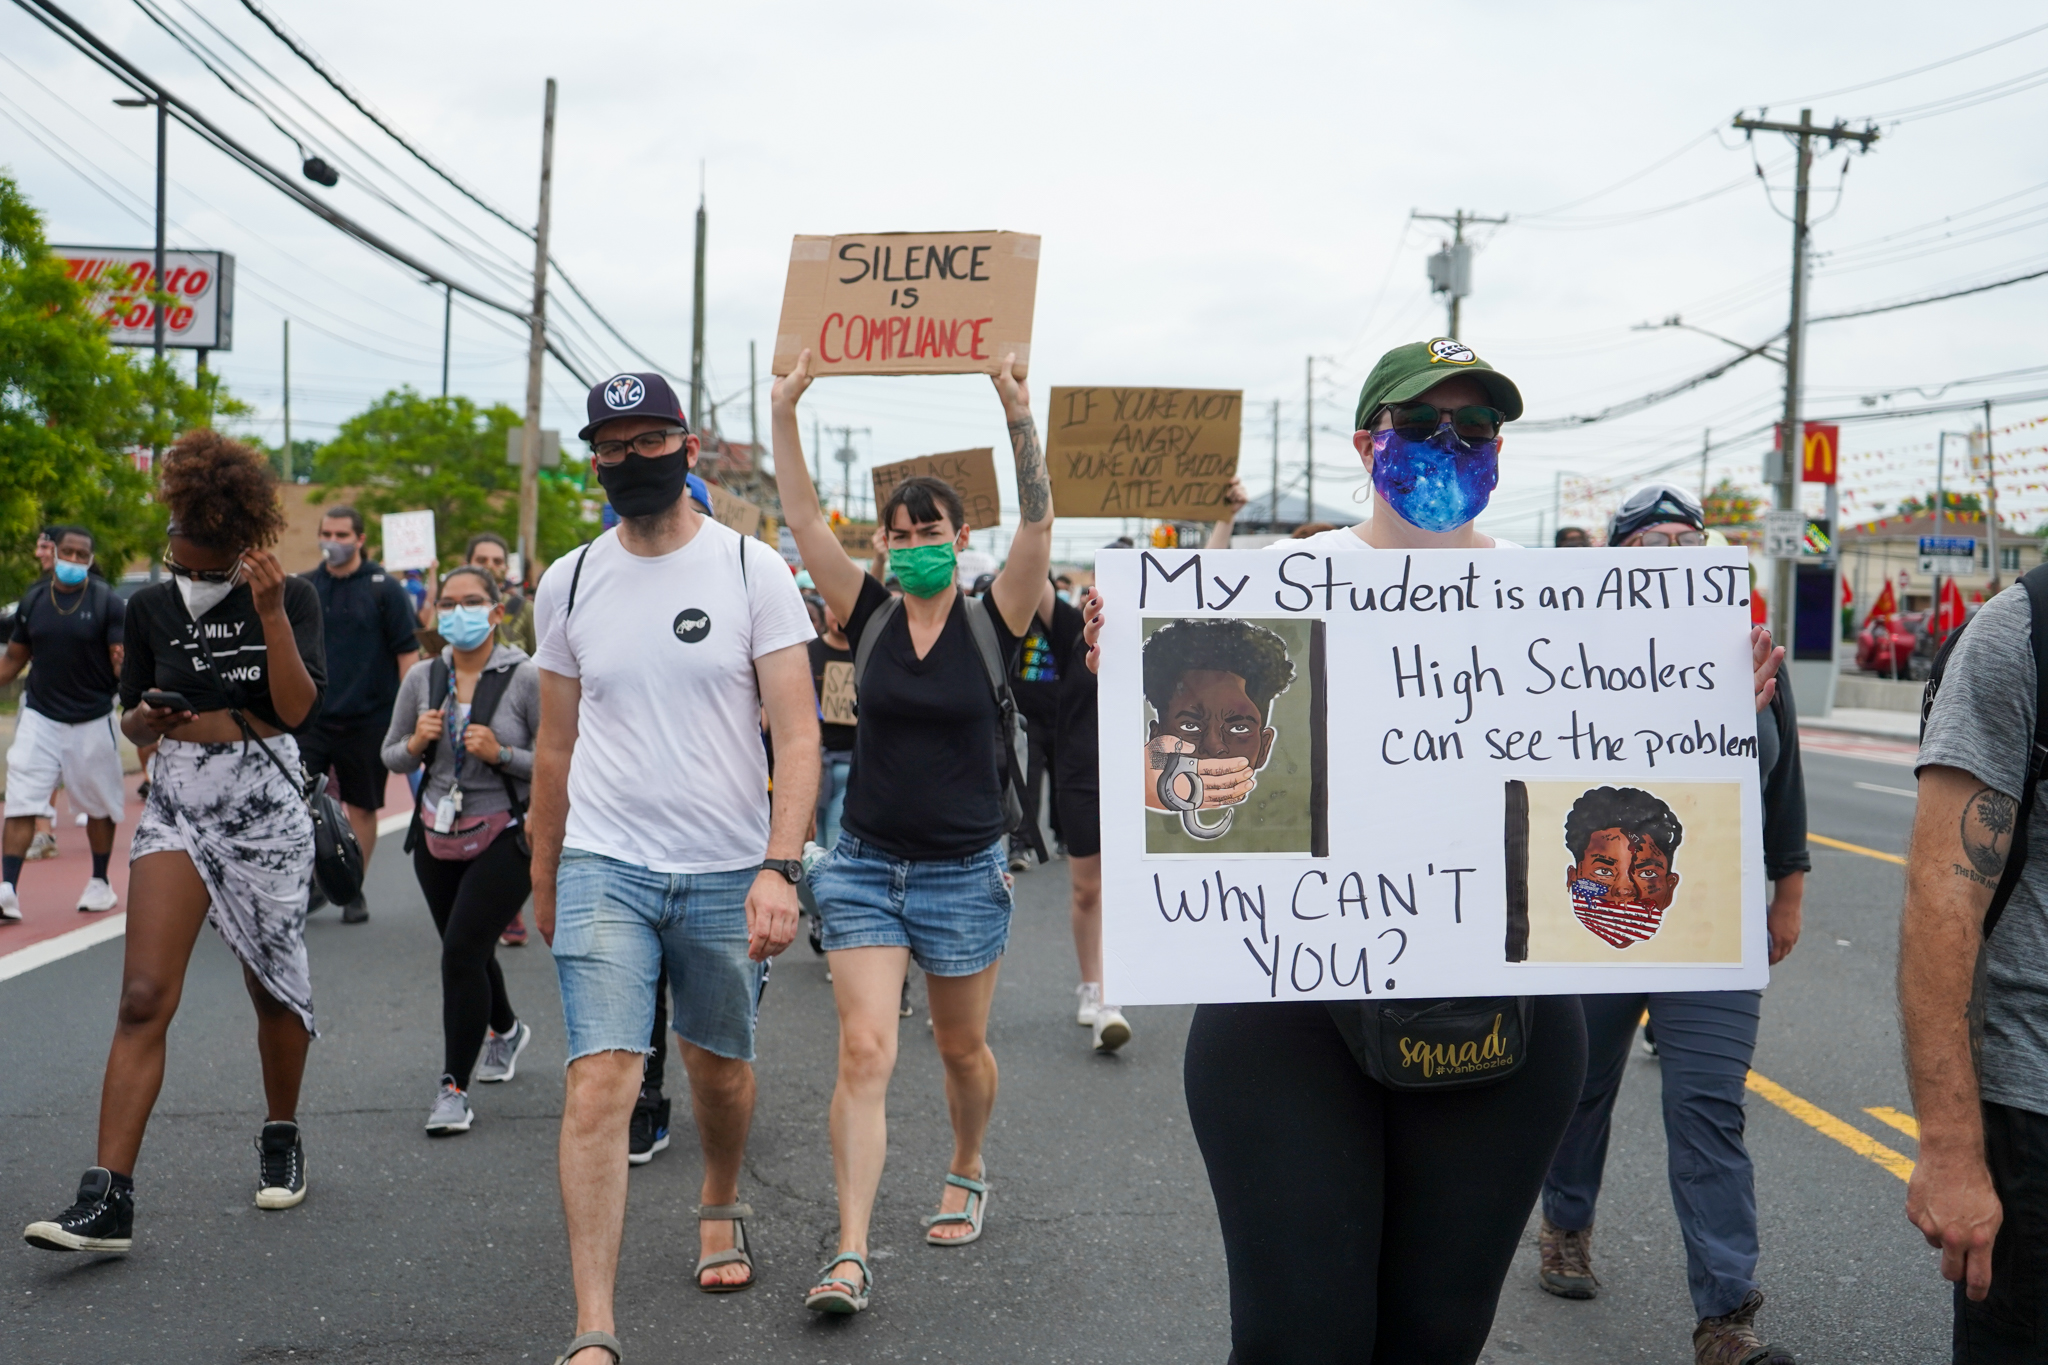 Demonstrators held signs to bring awareness to police brutality in Staten Island and around the United States. June 5, 2020 in New Dorp. (Staten Island Advance/ Alexandra Salmieri)